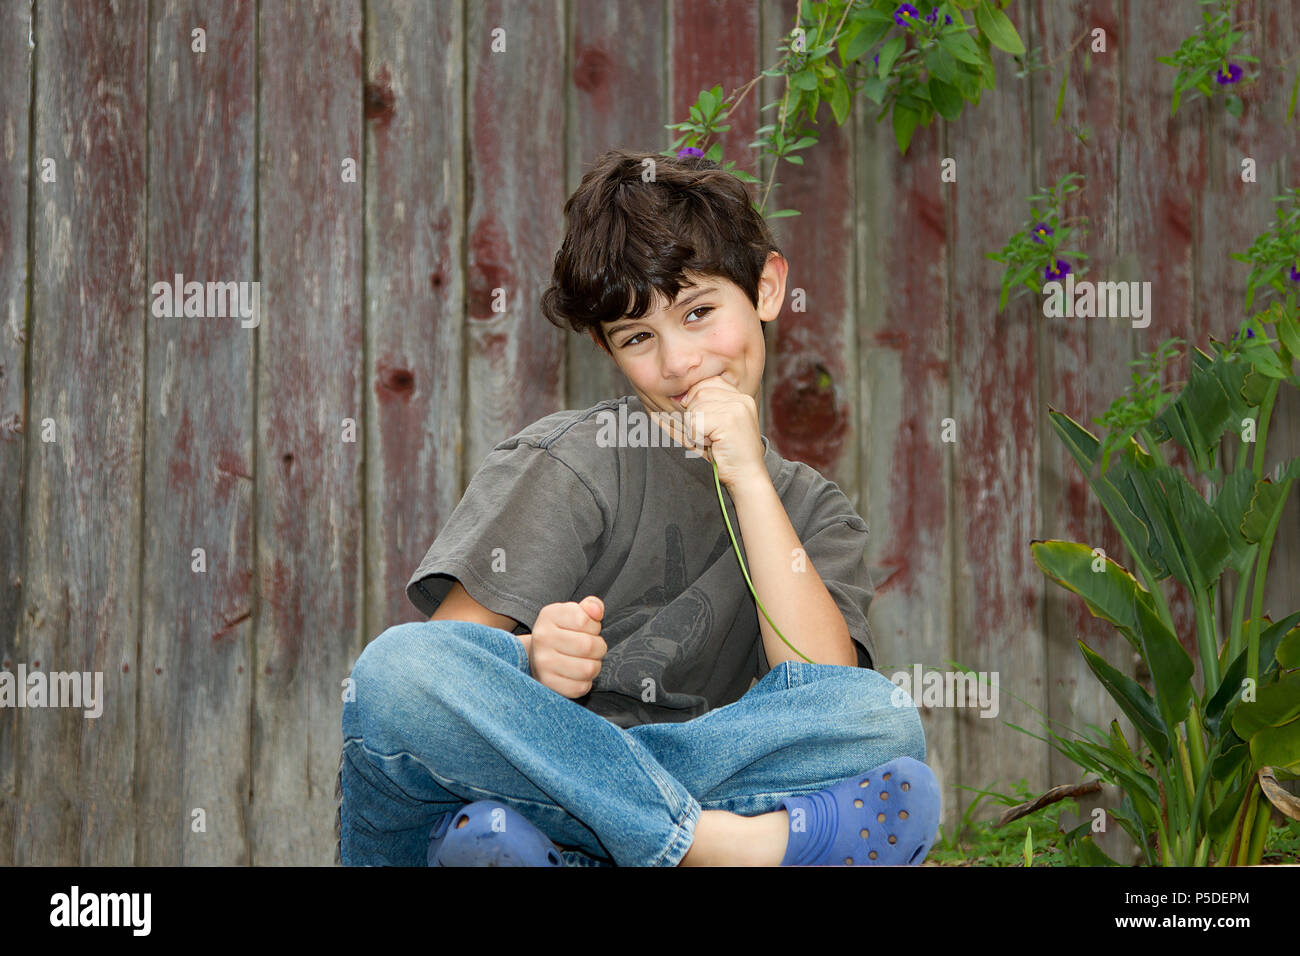 Boy With Mischievious Grin Stock Photo